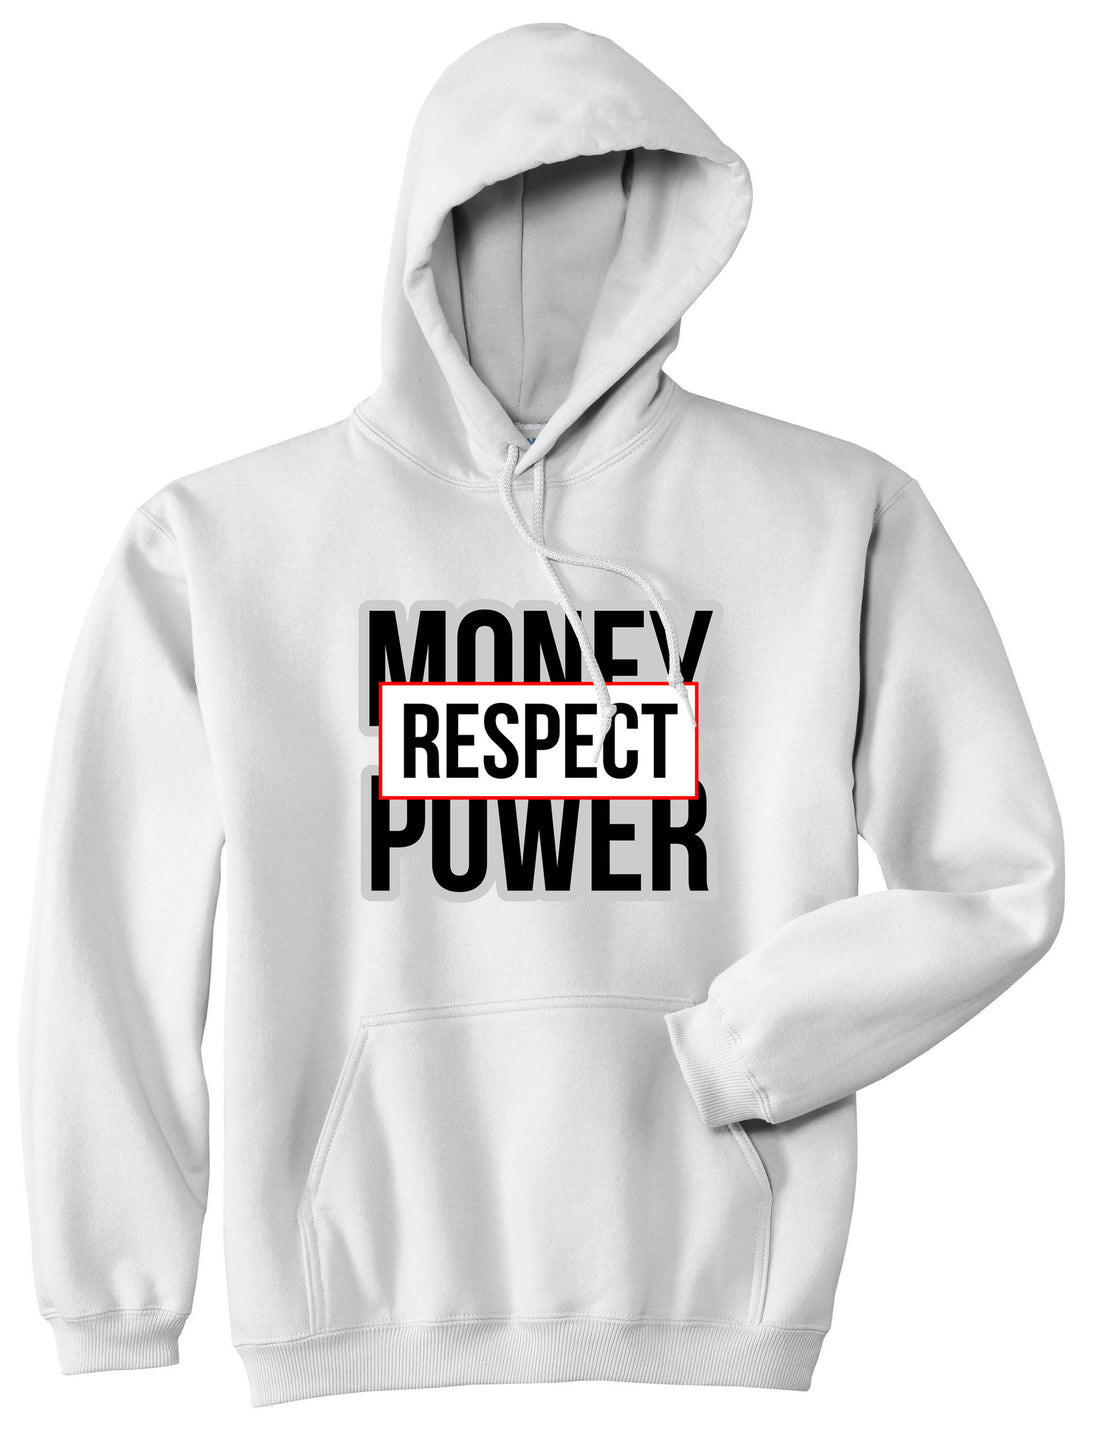 Money Power Respect Boys Kids Pullover Hoodie Hoody in White By Kings Of NY